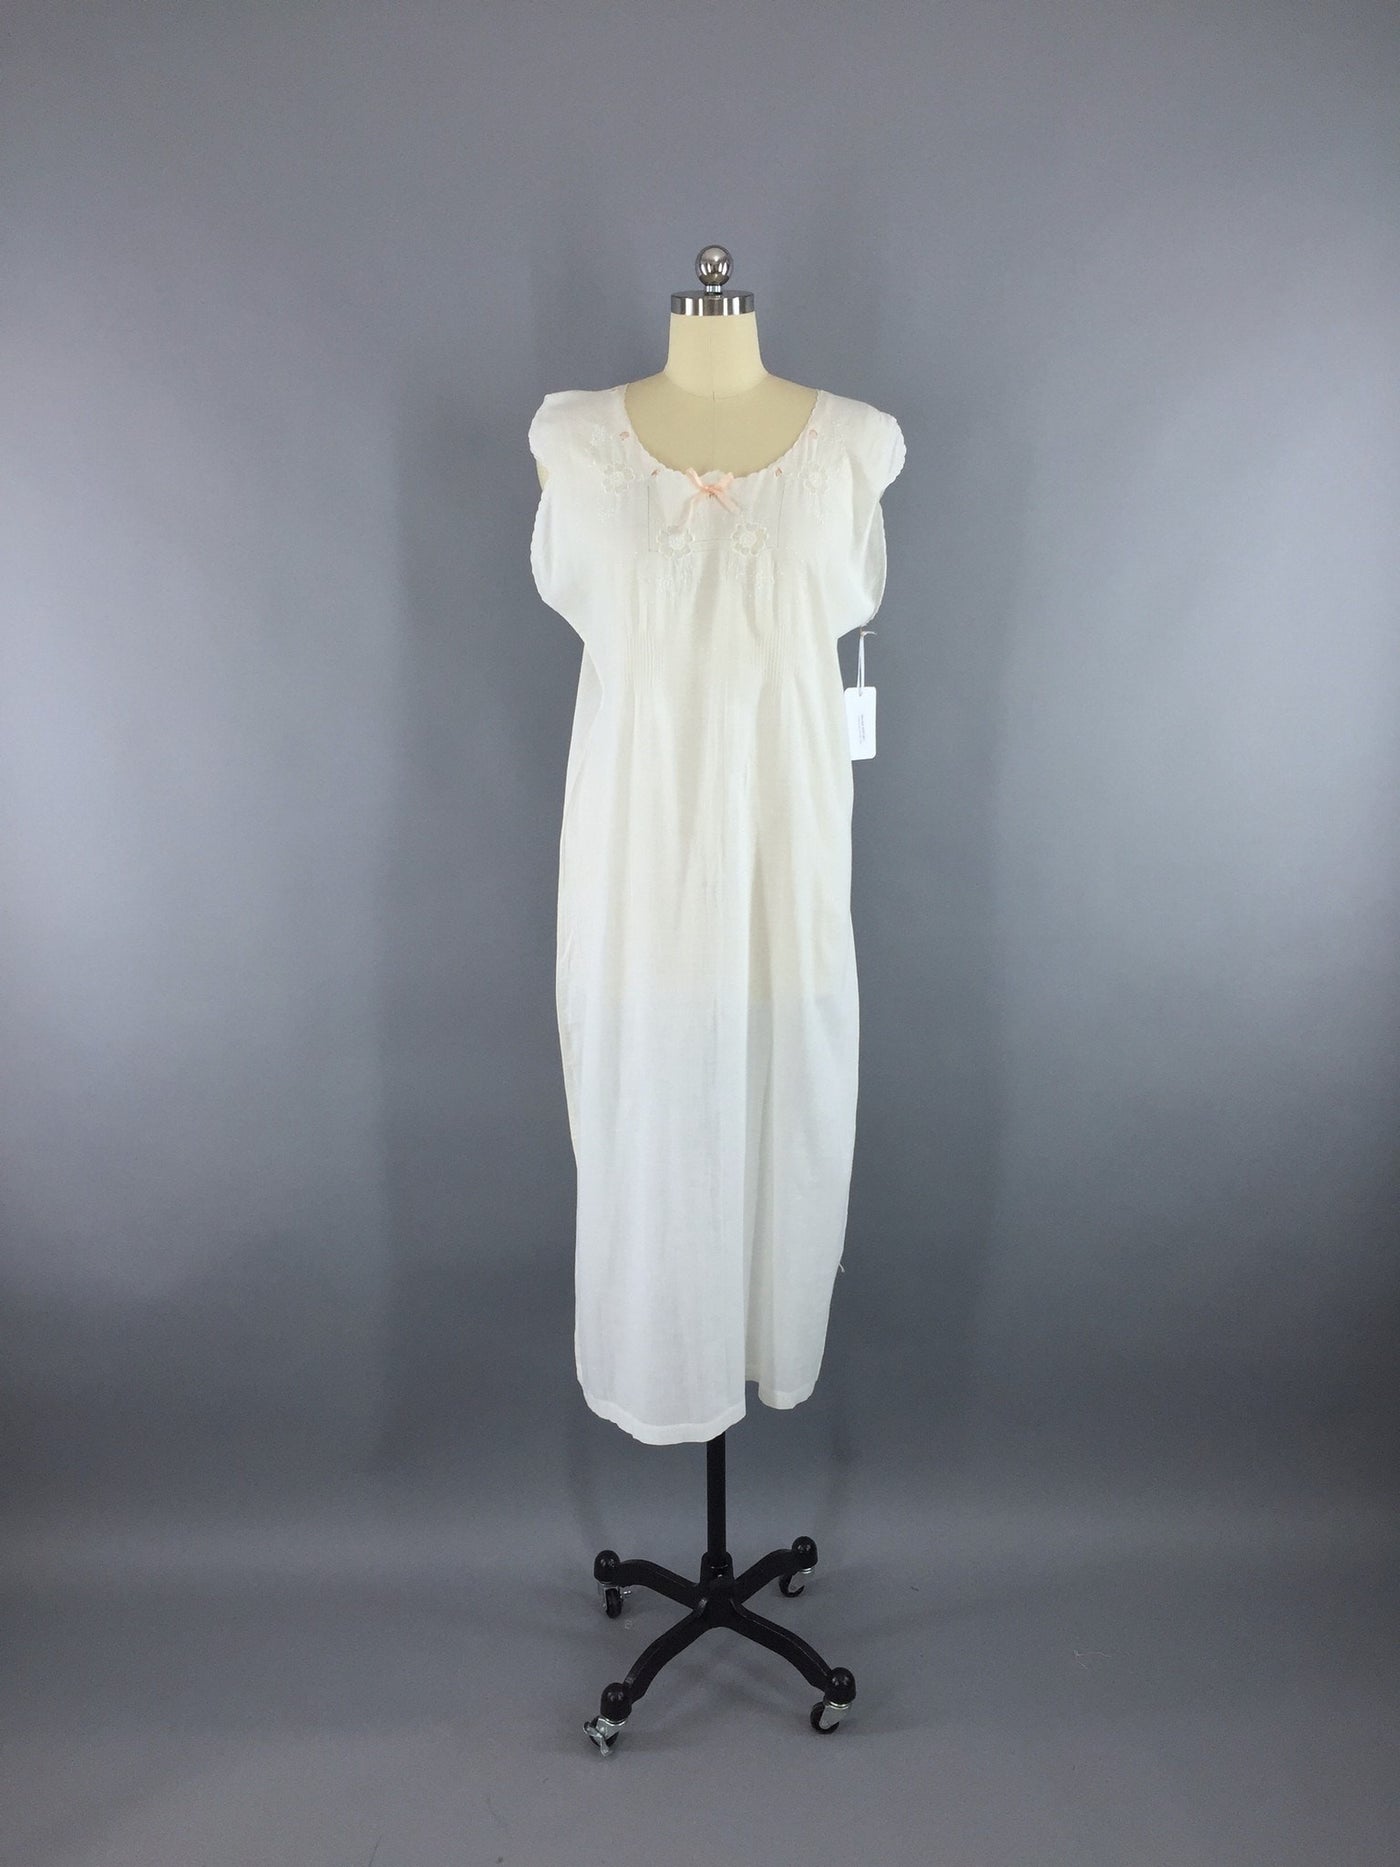 Vintage 1920s Embroidered White Cotton Nightgown - ThisBlueBird